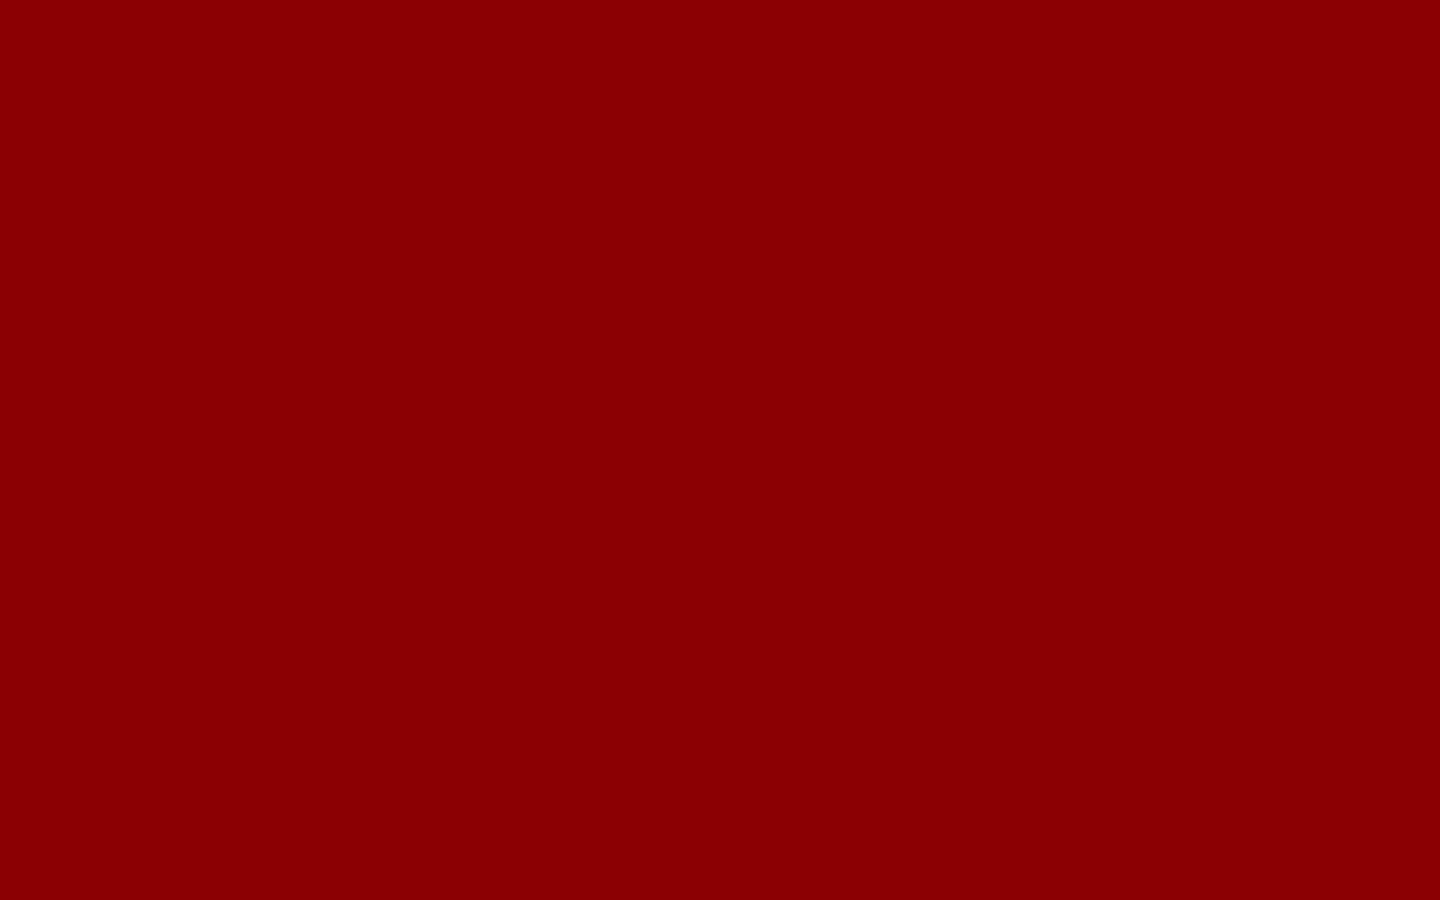 Deep Red Backgrounds Wallpaper Cave